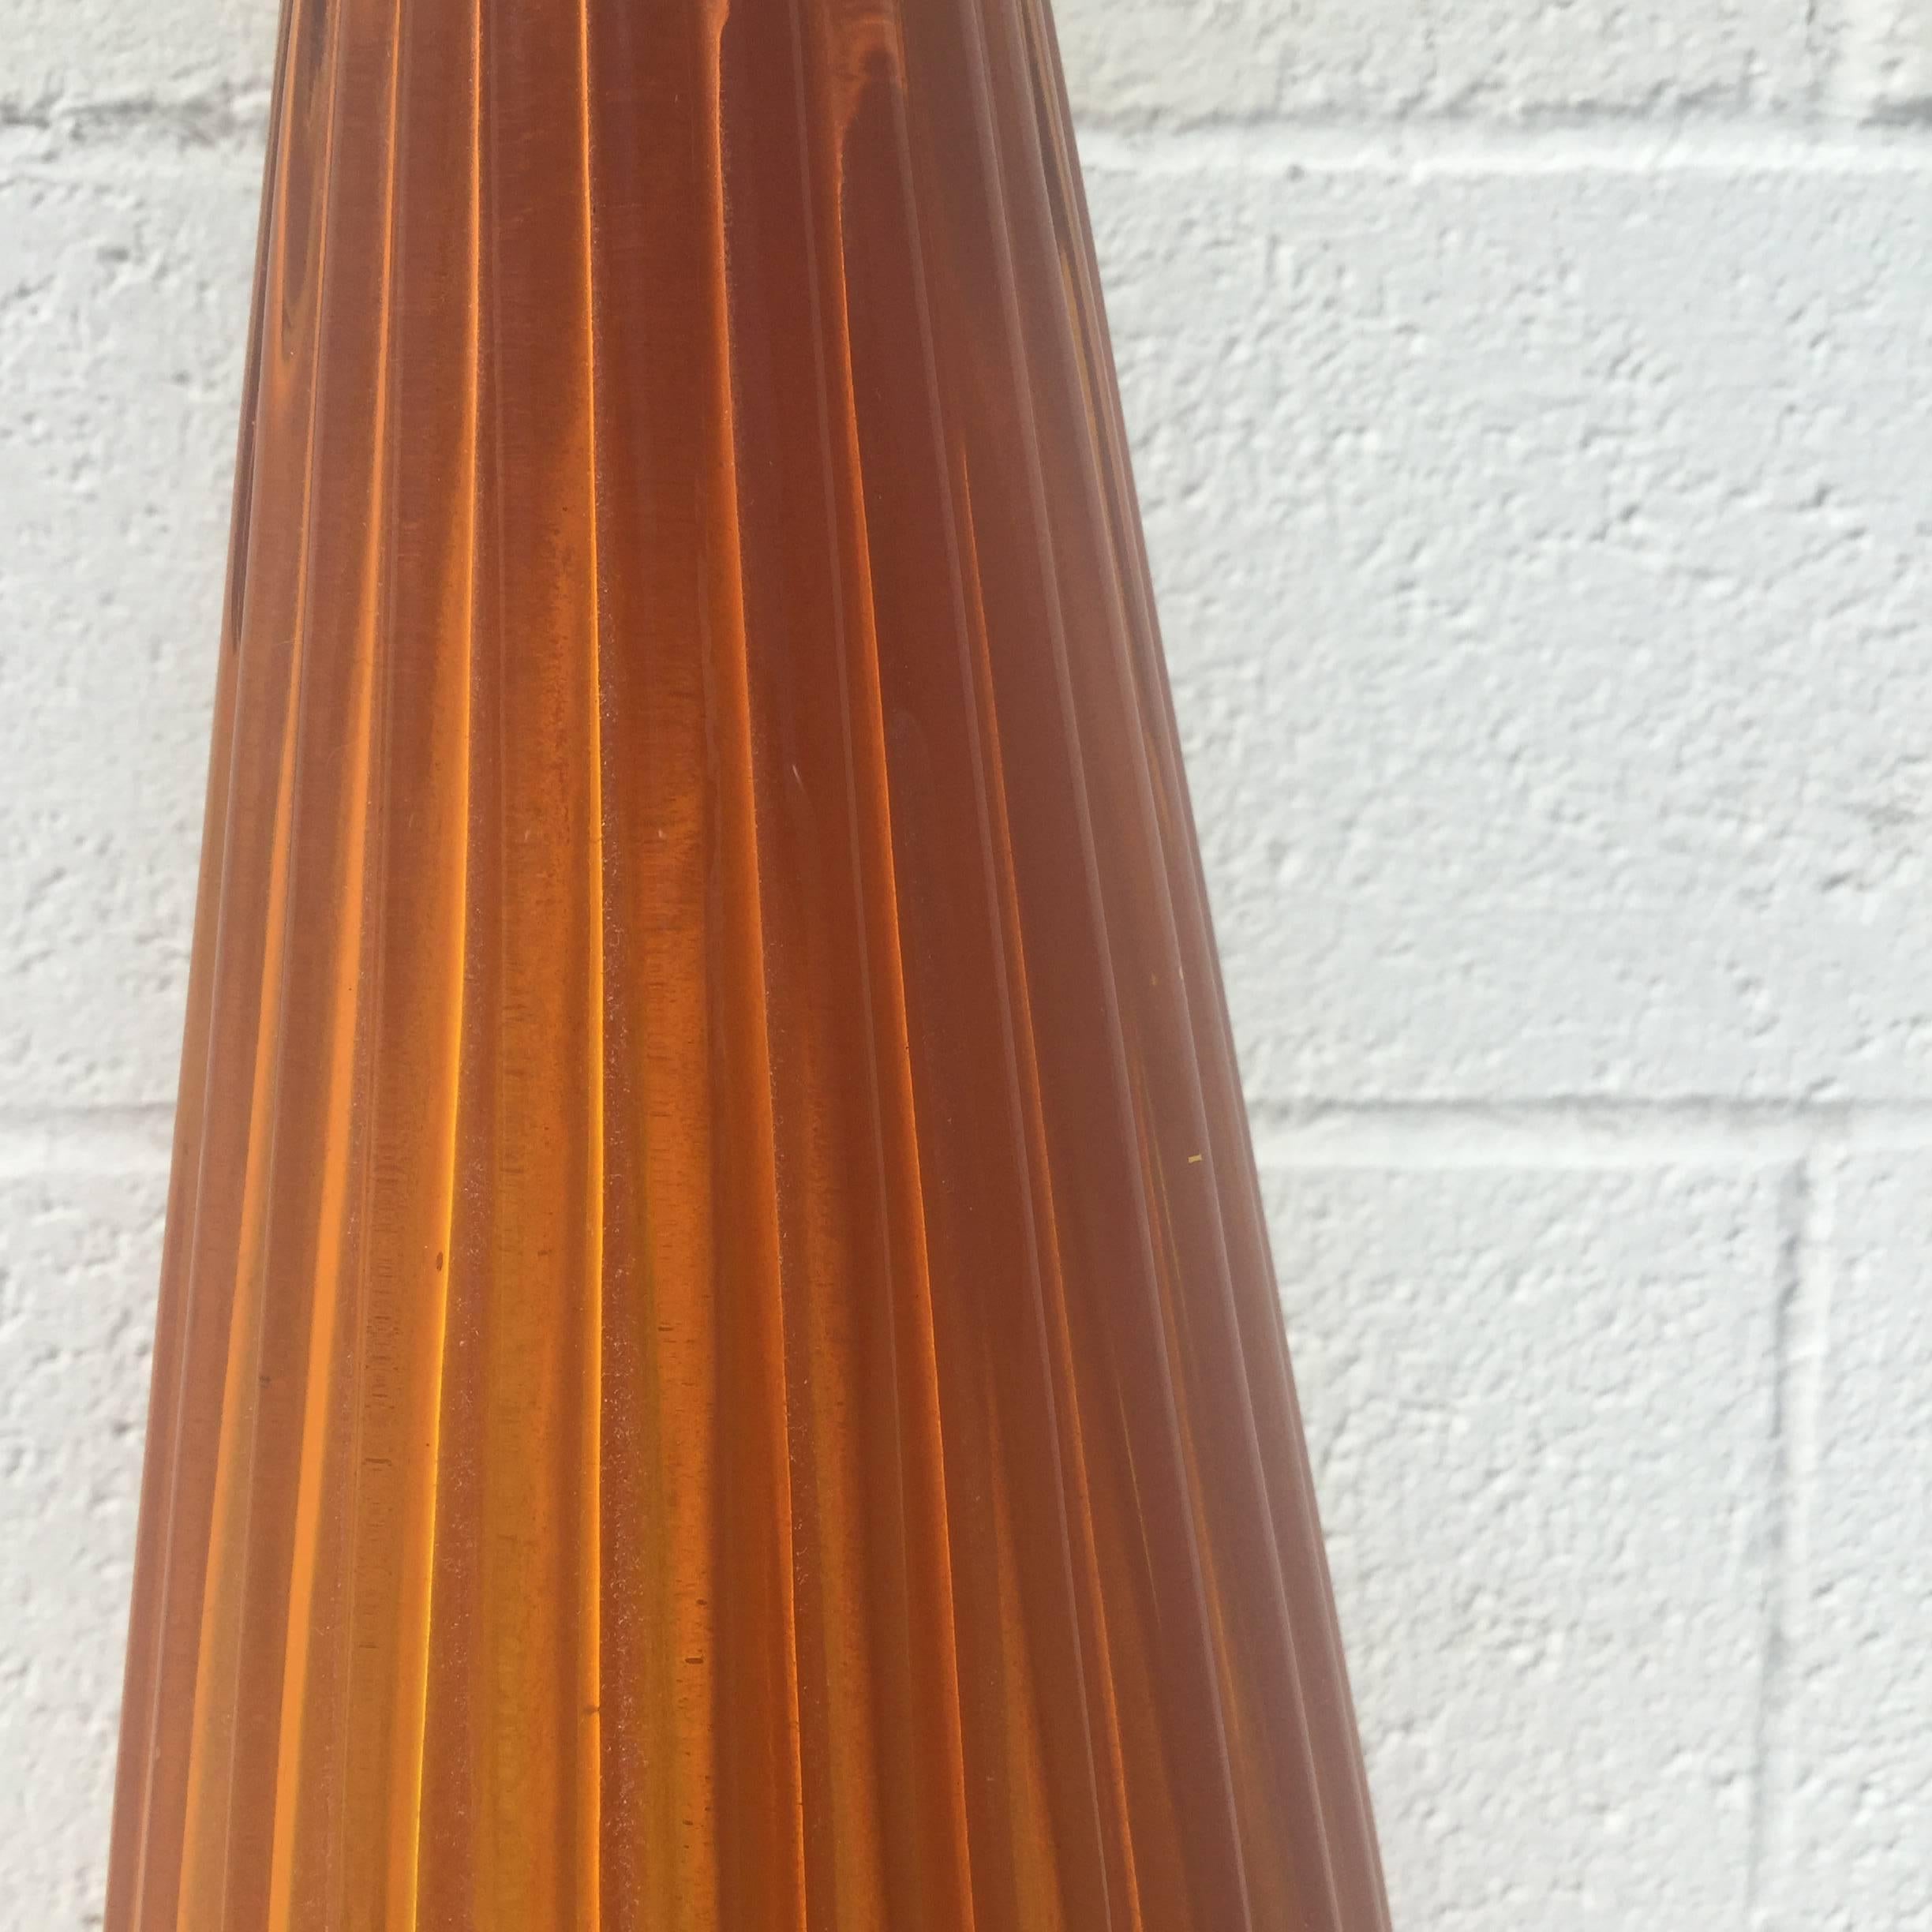 1950s tall Murano glass table lamp. Made in Italy. Burnt orange, pumpkin color glass. Still retains original 